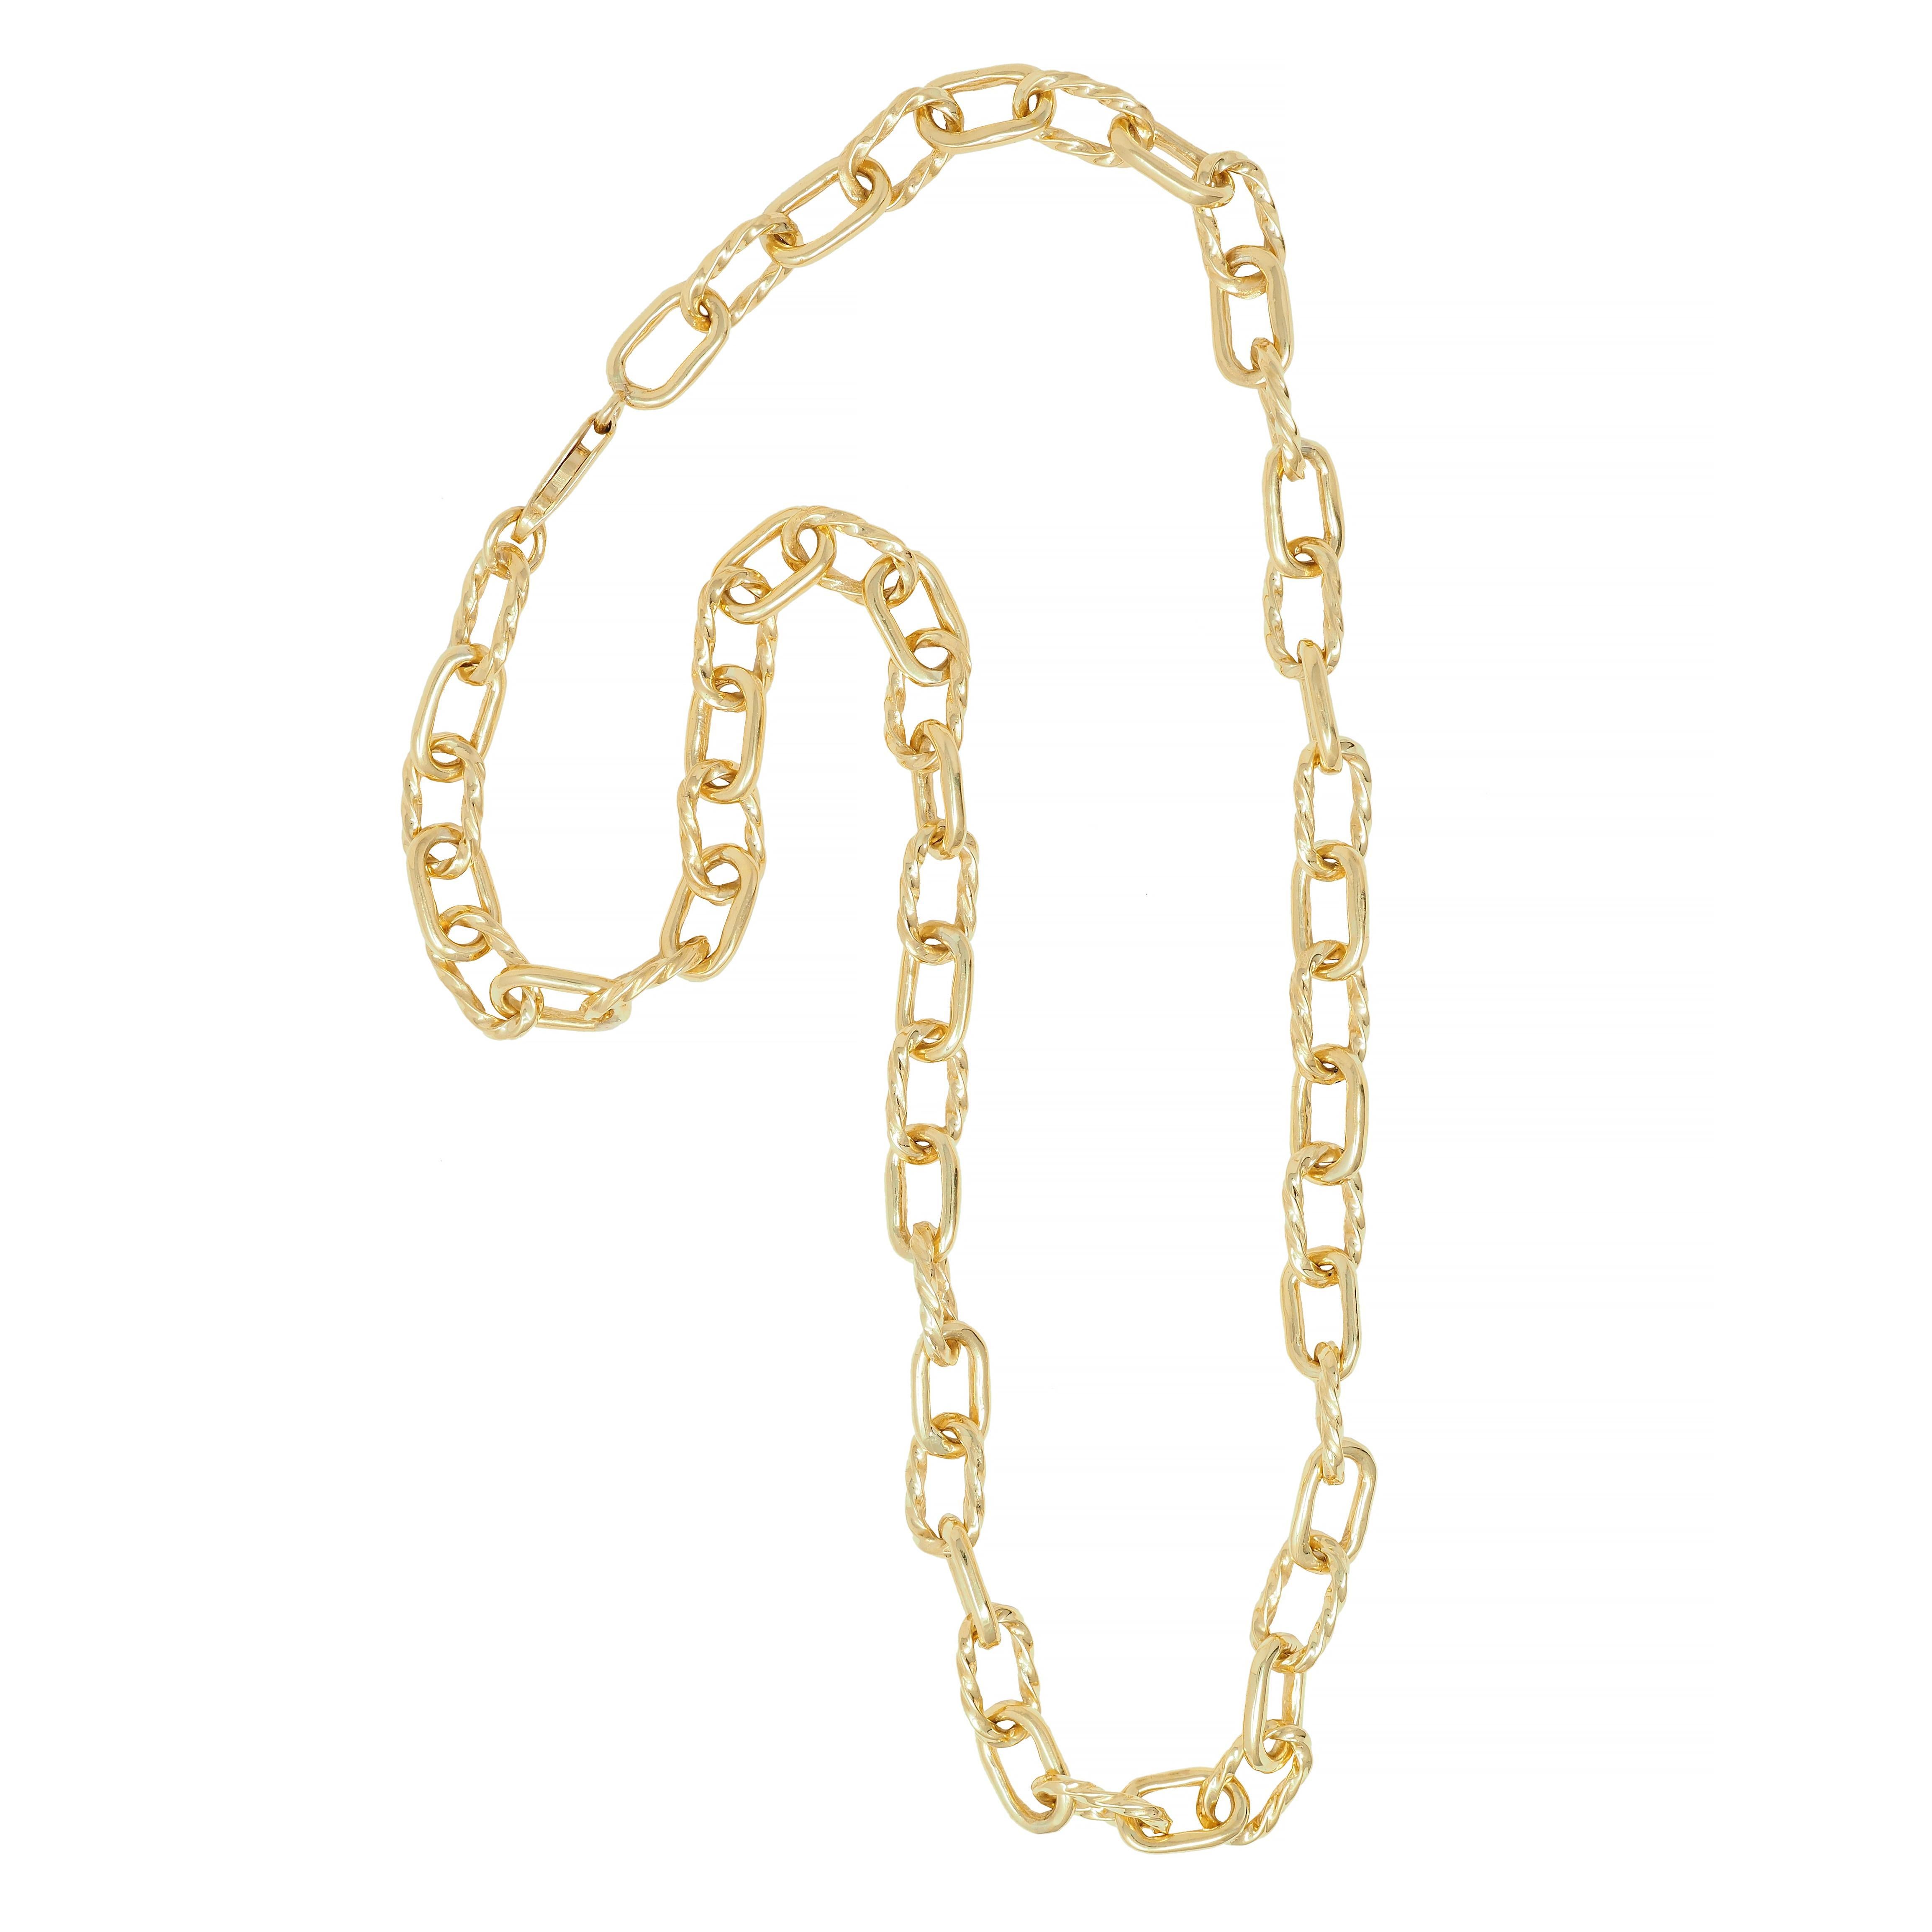 1960's 18 Karat Yellow Gold Twisted Cable Link Vintage Chain Necklace For Sale 7